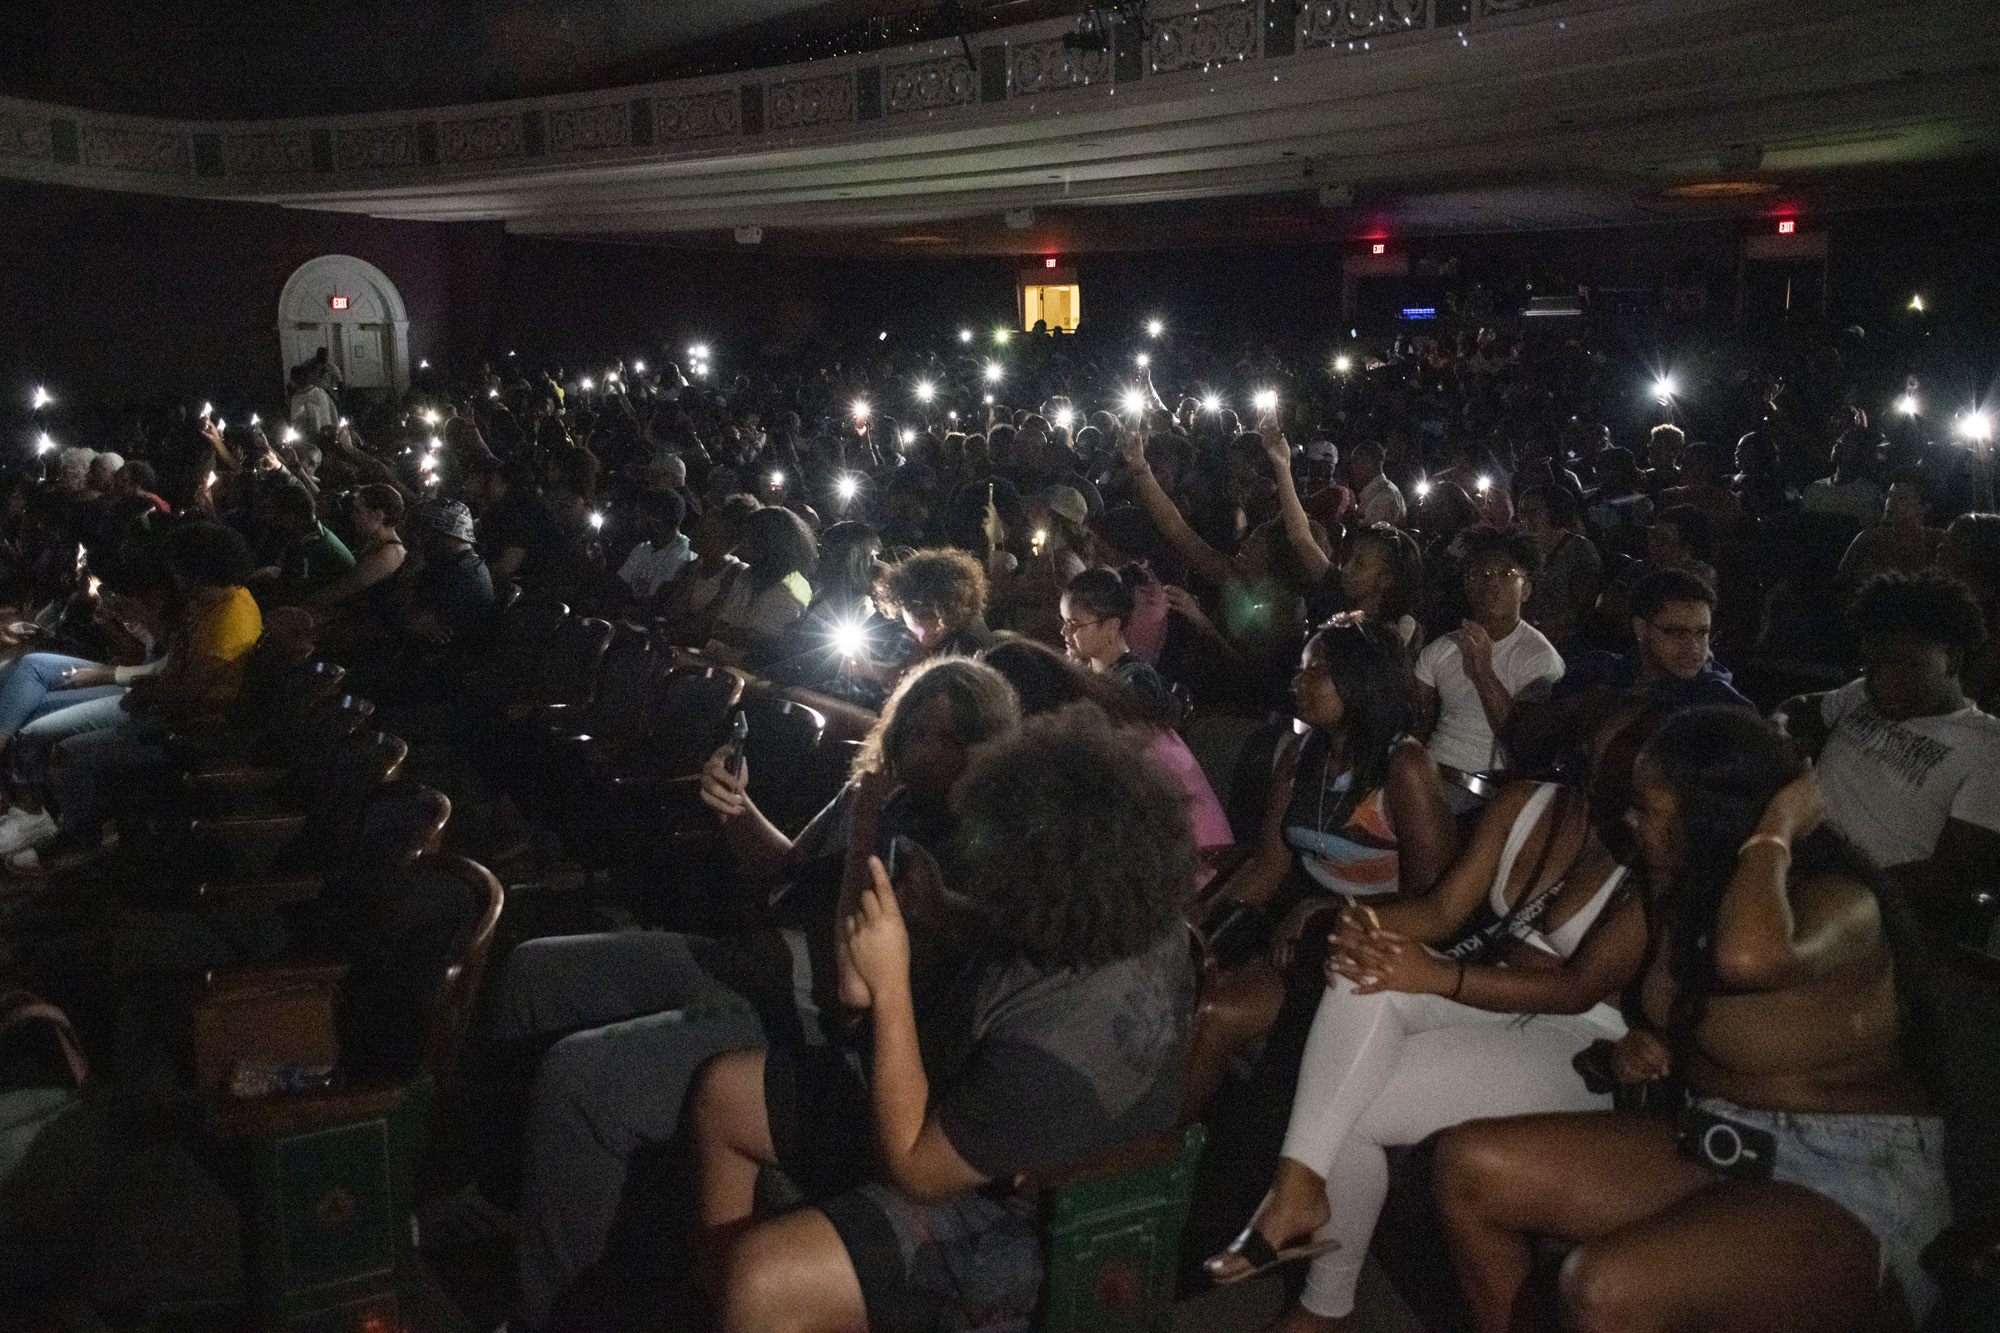 In one of the last events of BAR weekend, alumni and students light up OHIO’s historic Templeton-Blackburn Alumni Memorial Auditorium, named in honor of John Templeton and Martha Jane Hunley Blackburn, OHIO’s first Black male and female graduates.